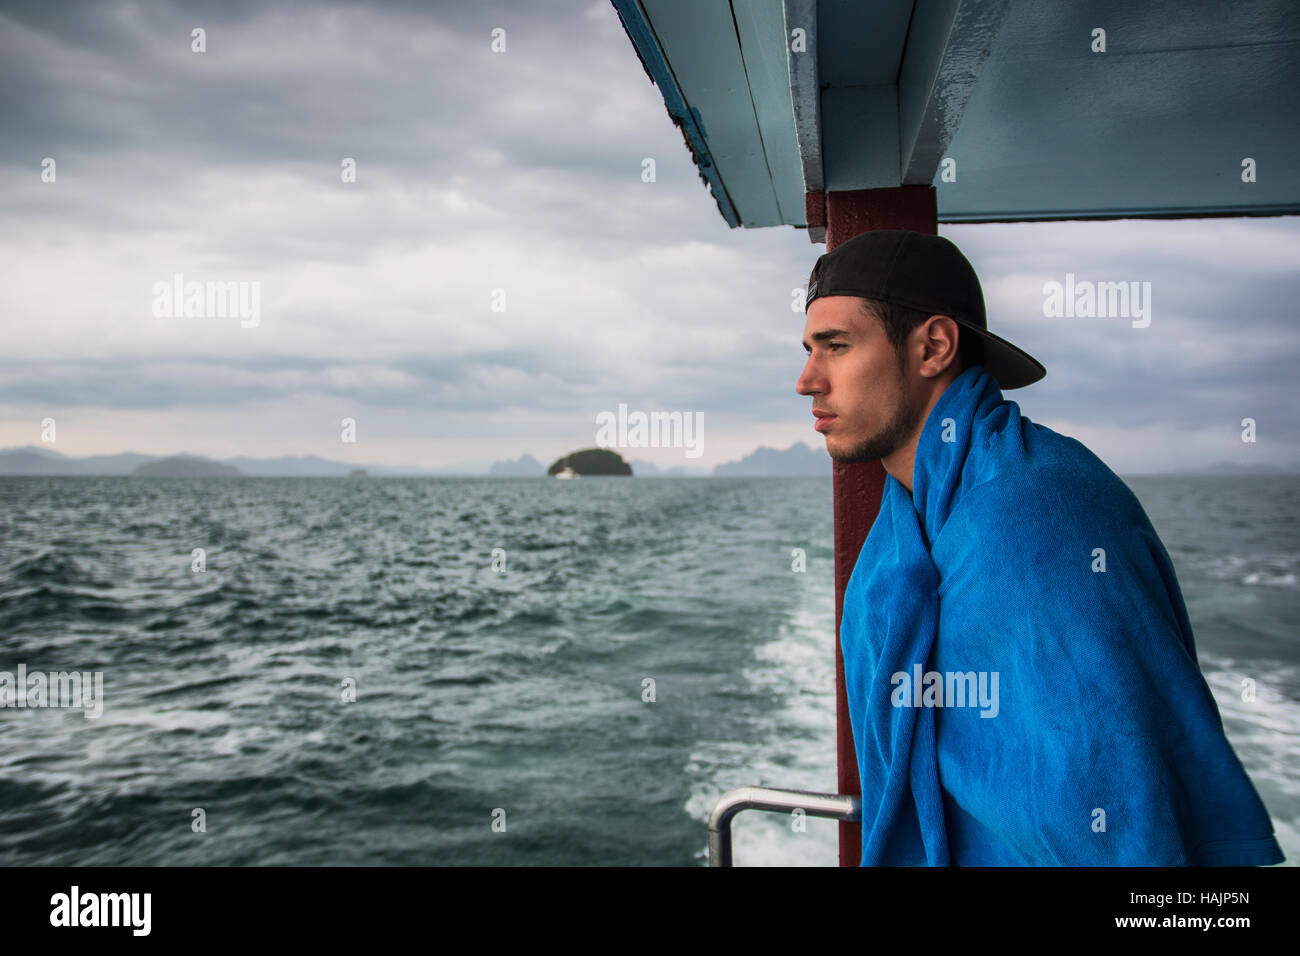 Profile shot of a man on a boat looking at an ocean over the railing Stock Photo